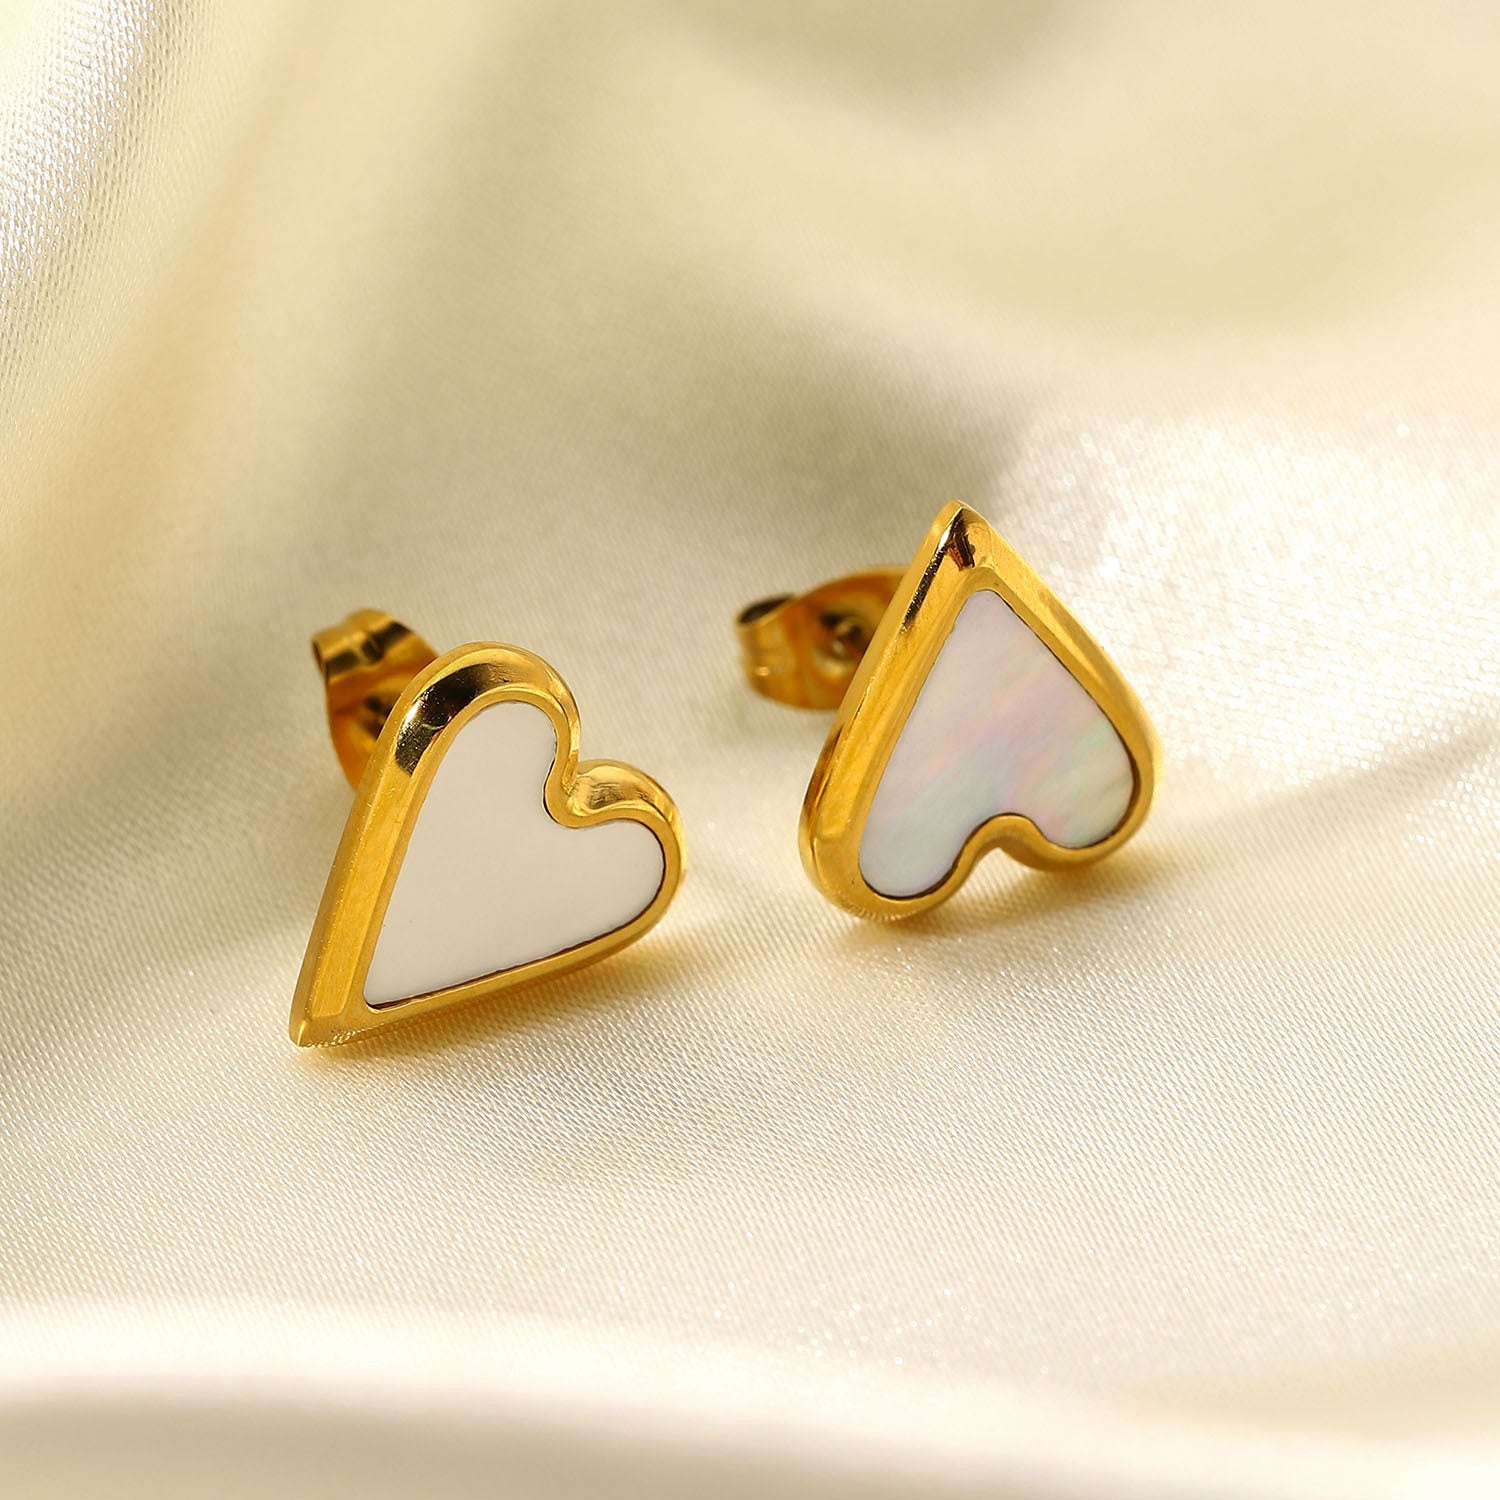 1# BEST Gold Pearl Heart Earrings Jewelry Gift for Women | #1 Best Most Top Trendy Trending Aesthetic Yellow Gold Shell Heart Stud Earrings Jewelry Gift for Women, Girls, Girlfriend, Mother, Wife, Daughter, Ladies | Mason & Madison Co.